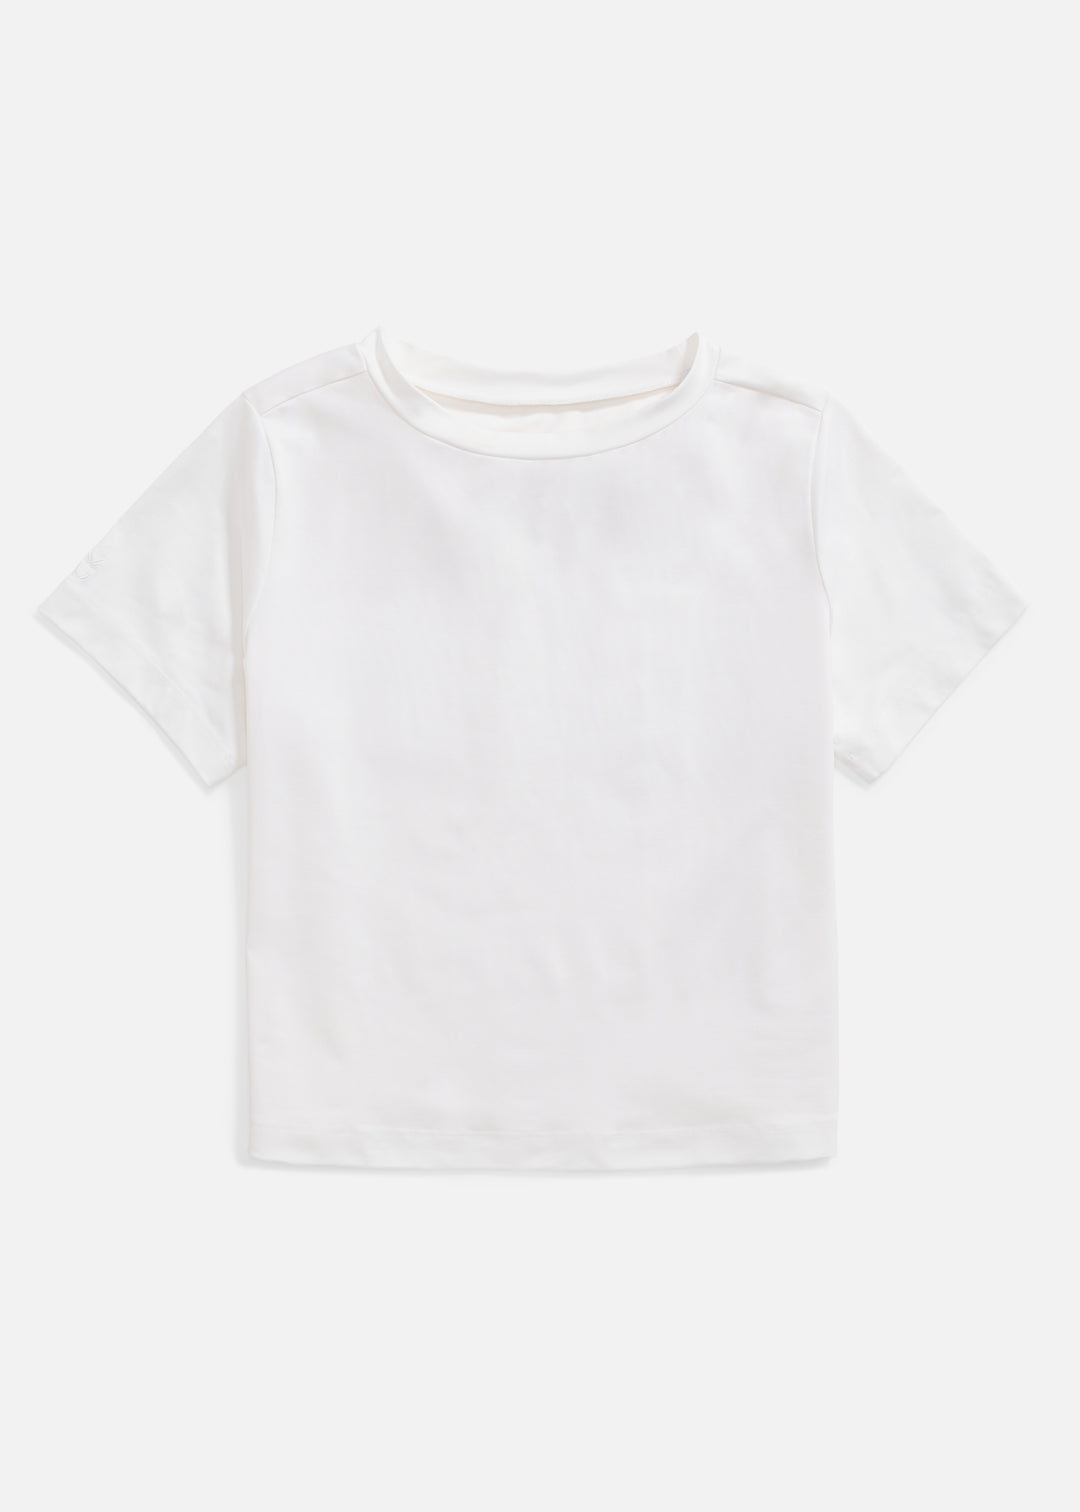 Surfside Crop Tee in Repreve® Stretch (White)